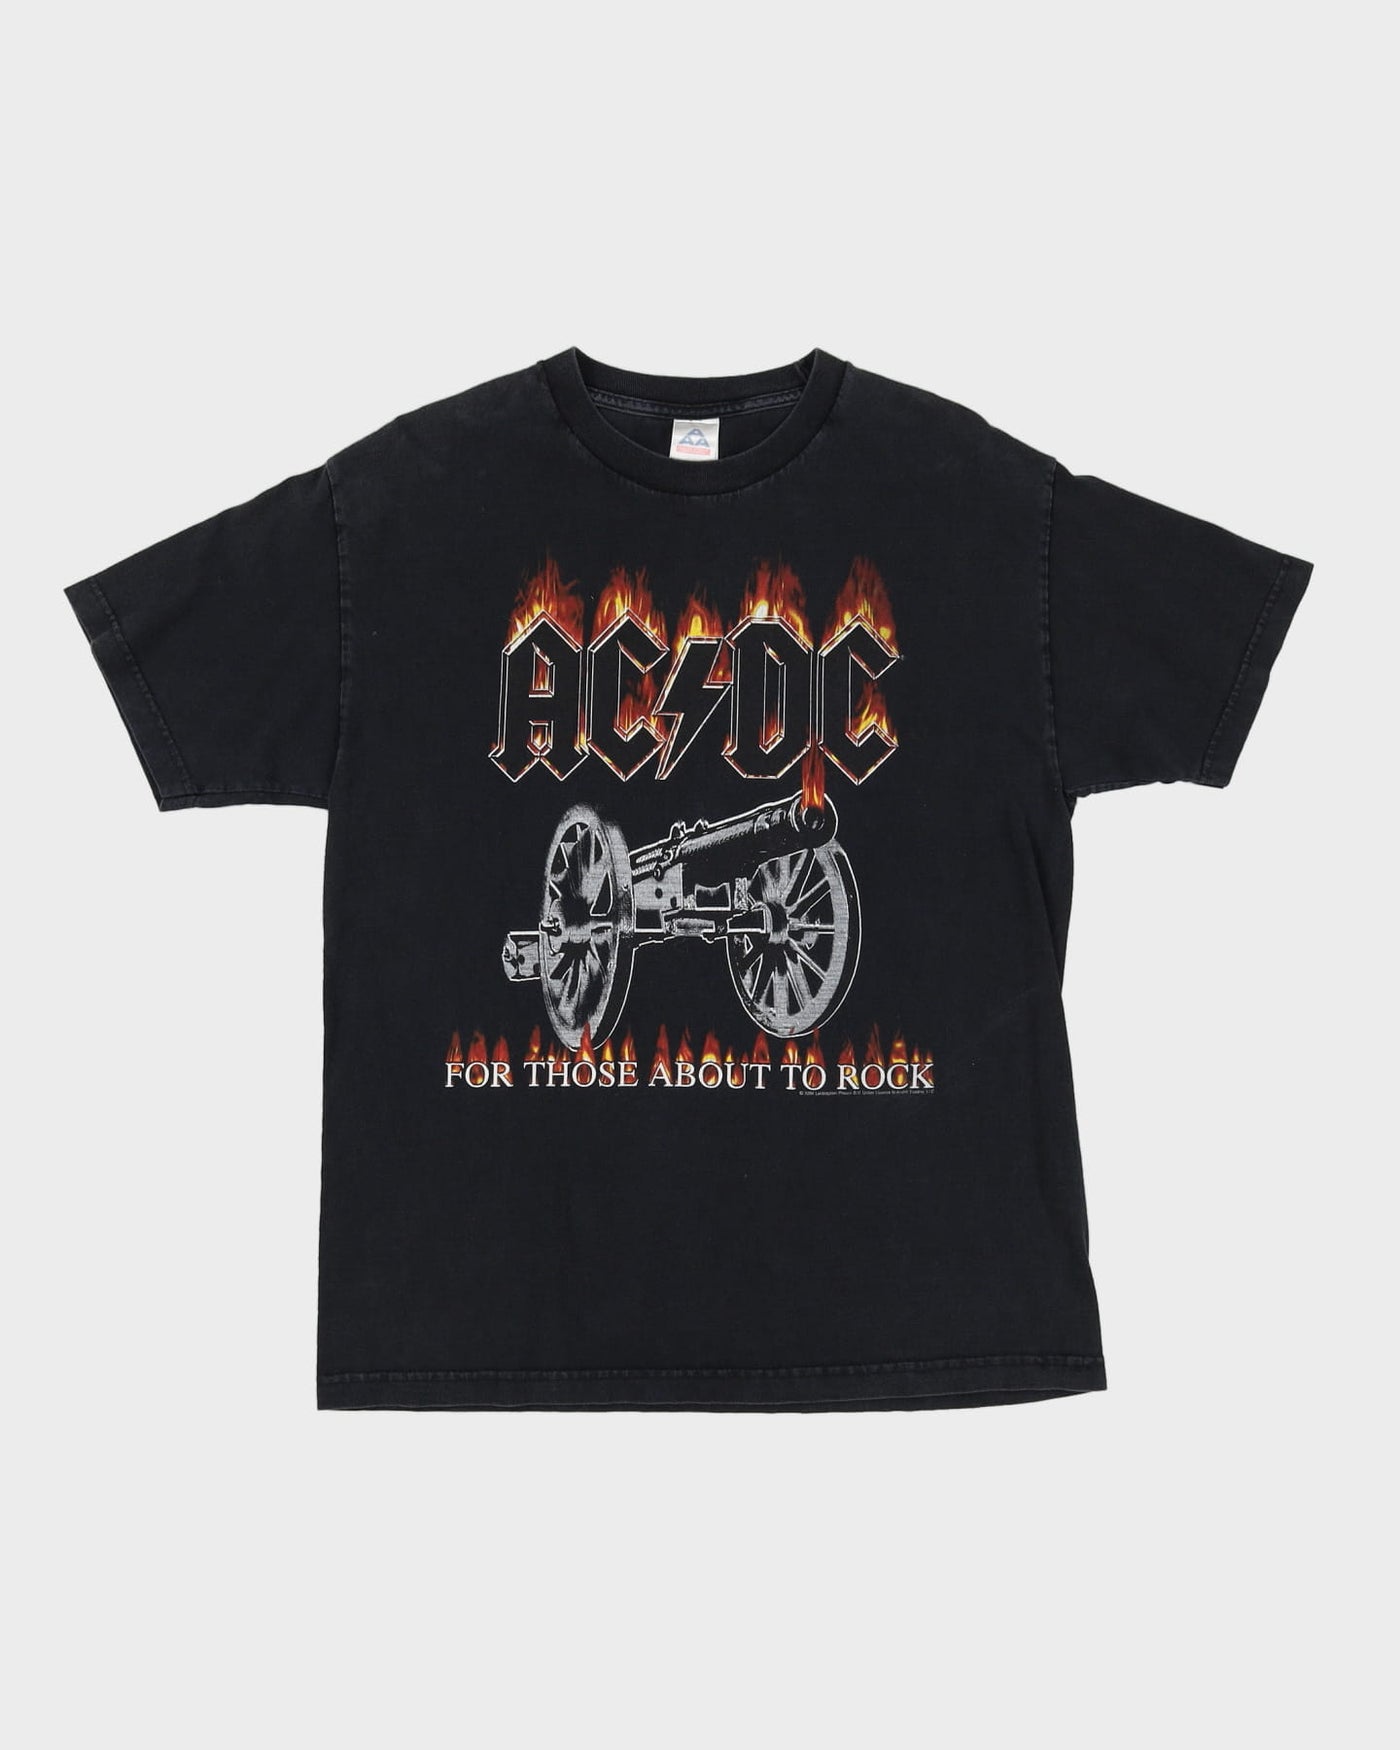 ACDC For Those About To Rock 2004 Graphic Band T-Shirt - L